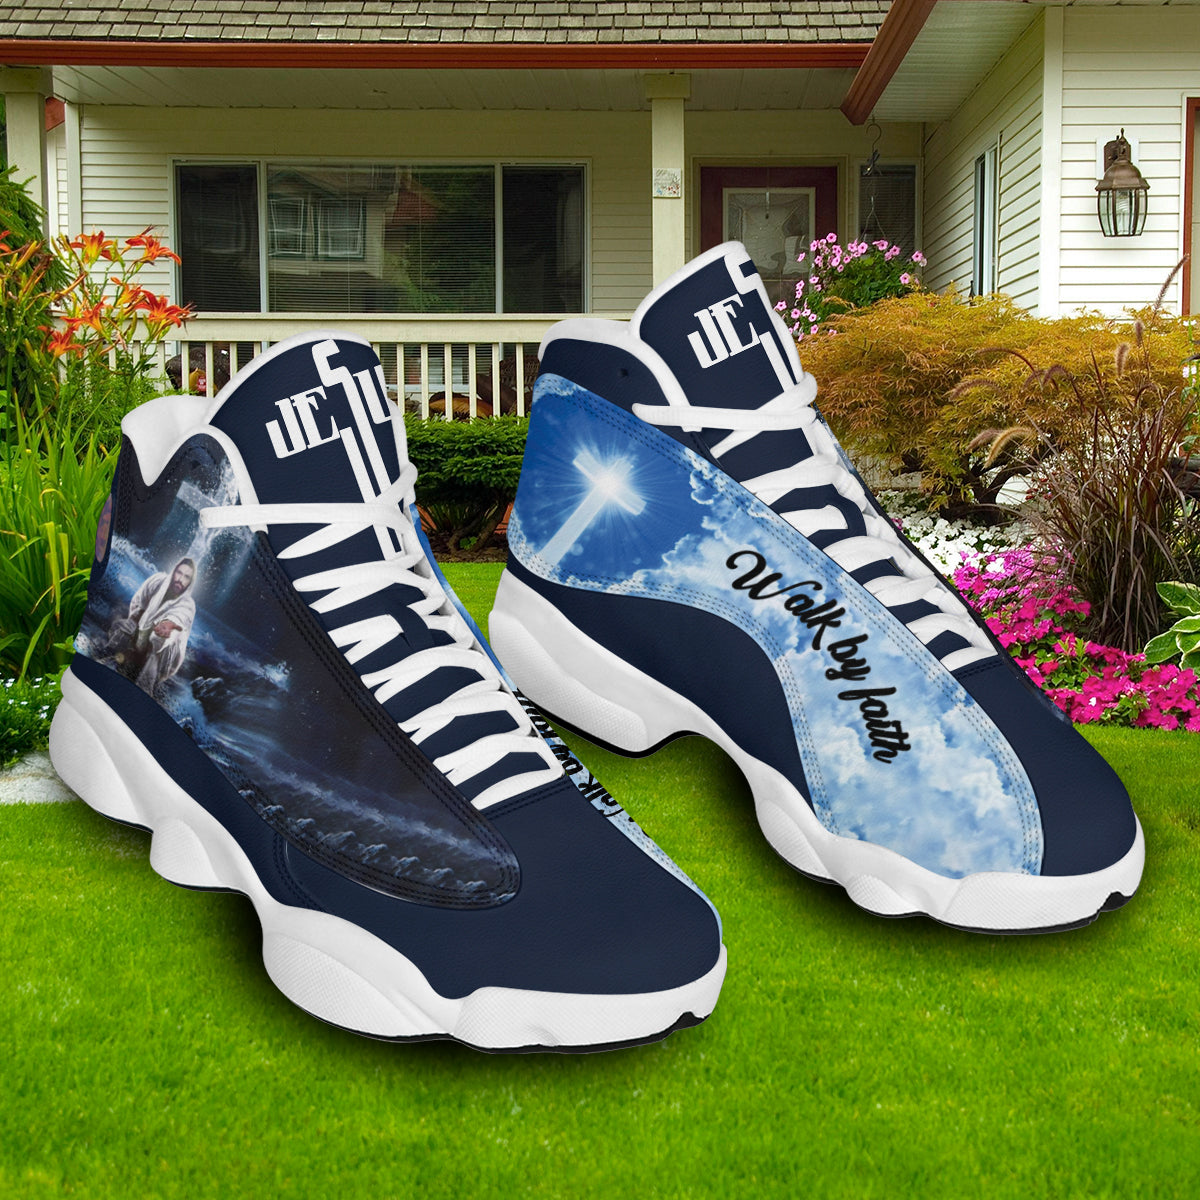 Walk By Faith Jesus Saved Basketball Shoes For Men Women - Christian Shoes - Jesus Shoes - Unisex Basketball Shoes